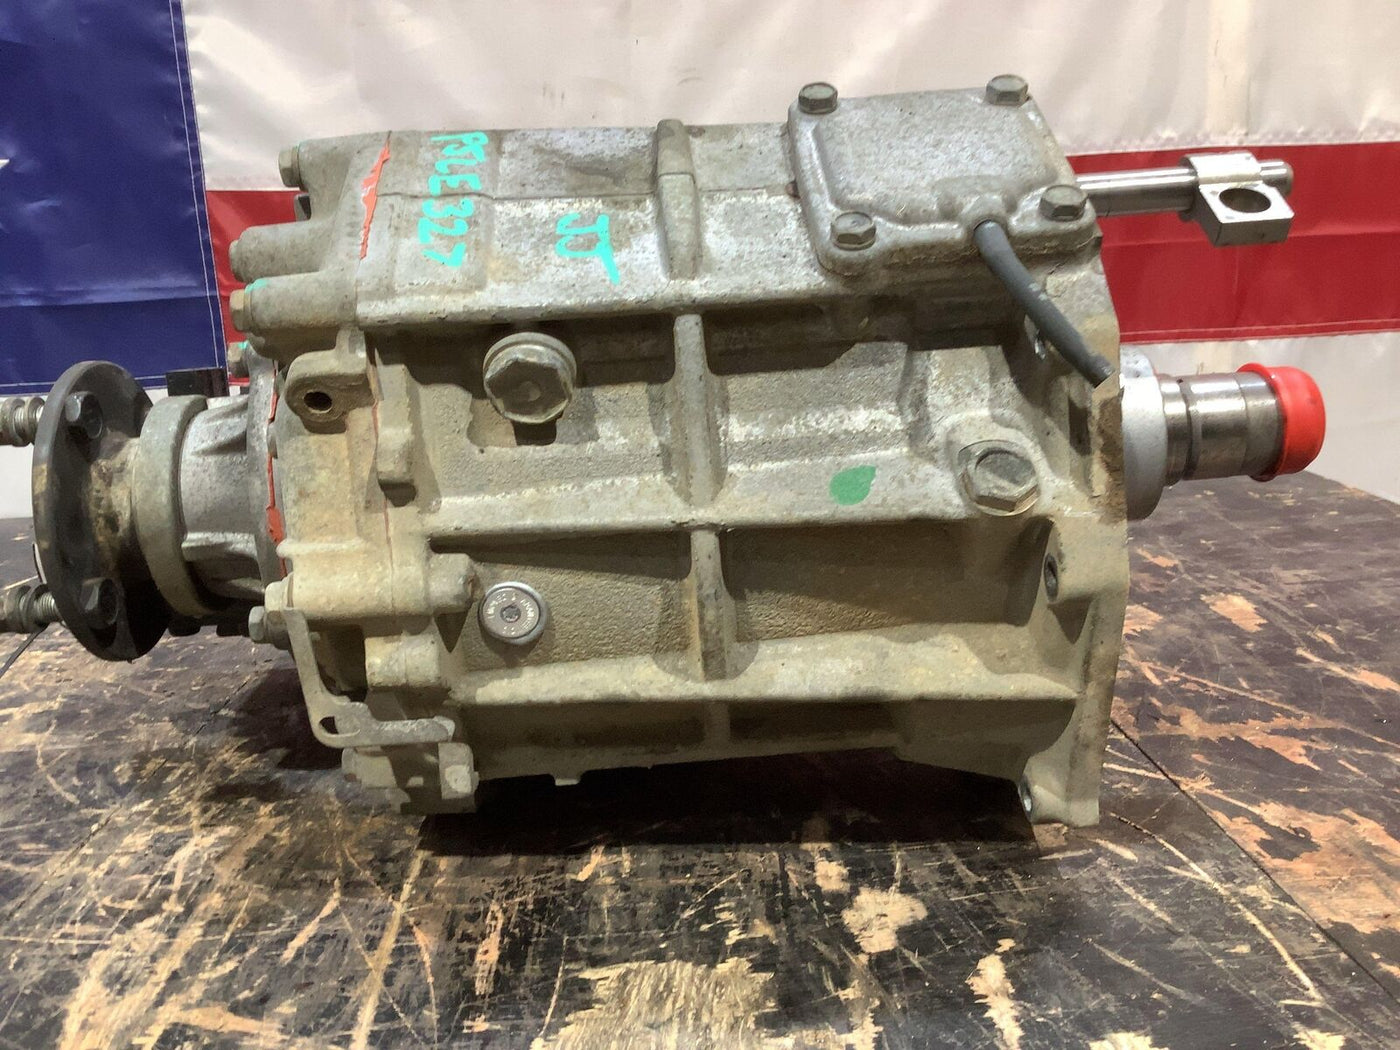 2003 - 2009 Lexus GX470 AWD Transfer Case (Unable To Test) 165K Miles